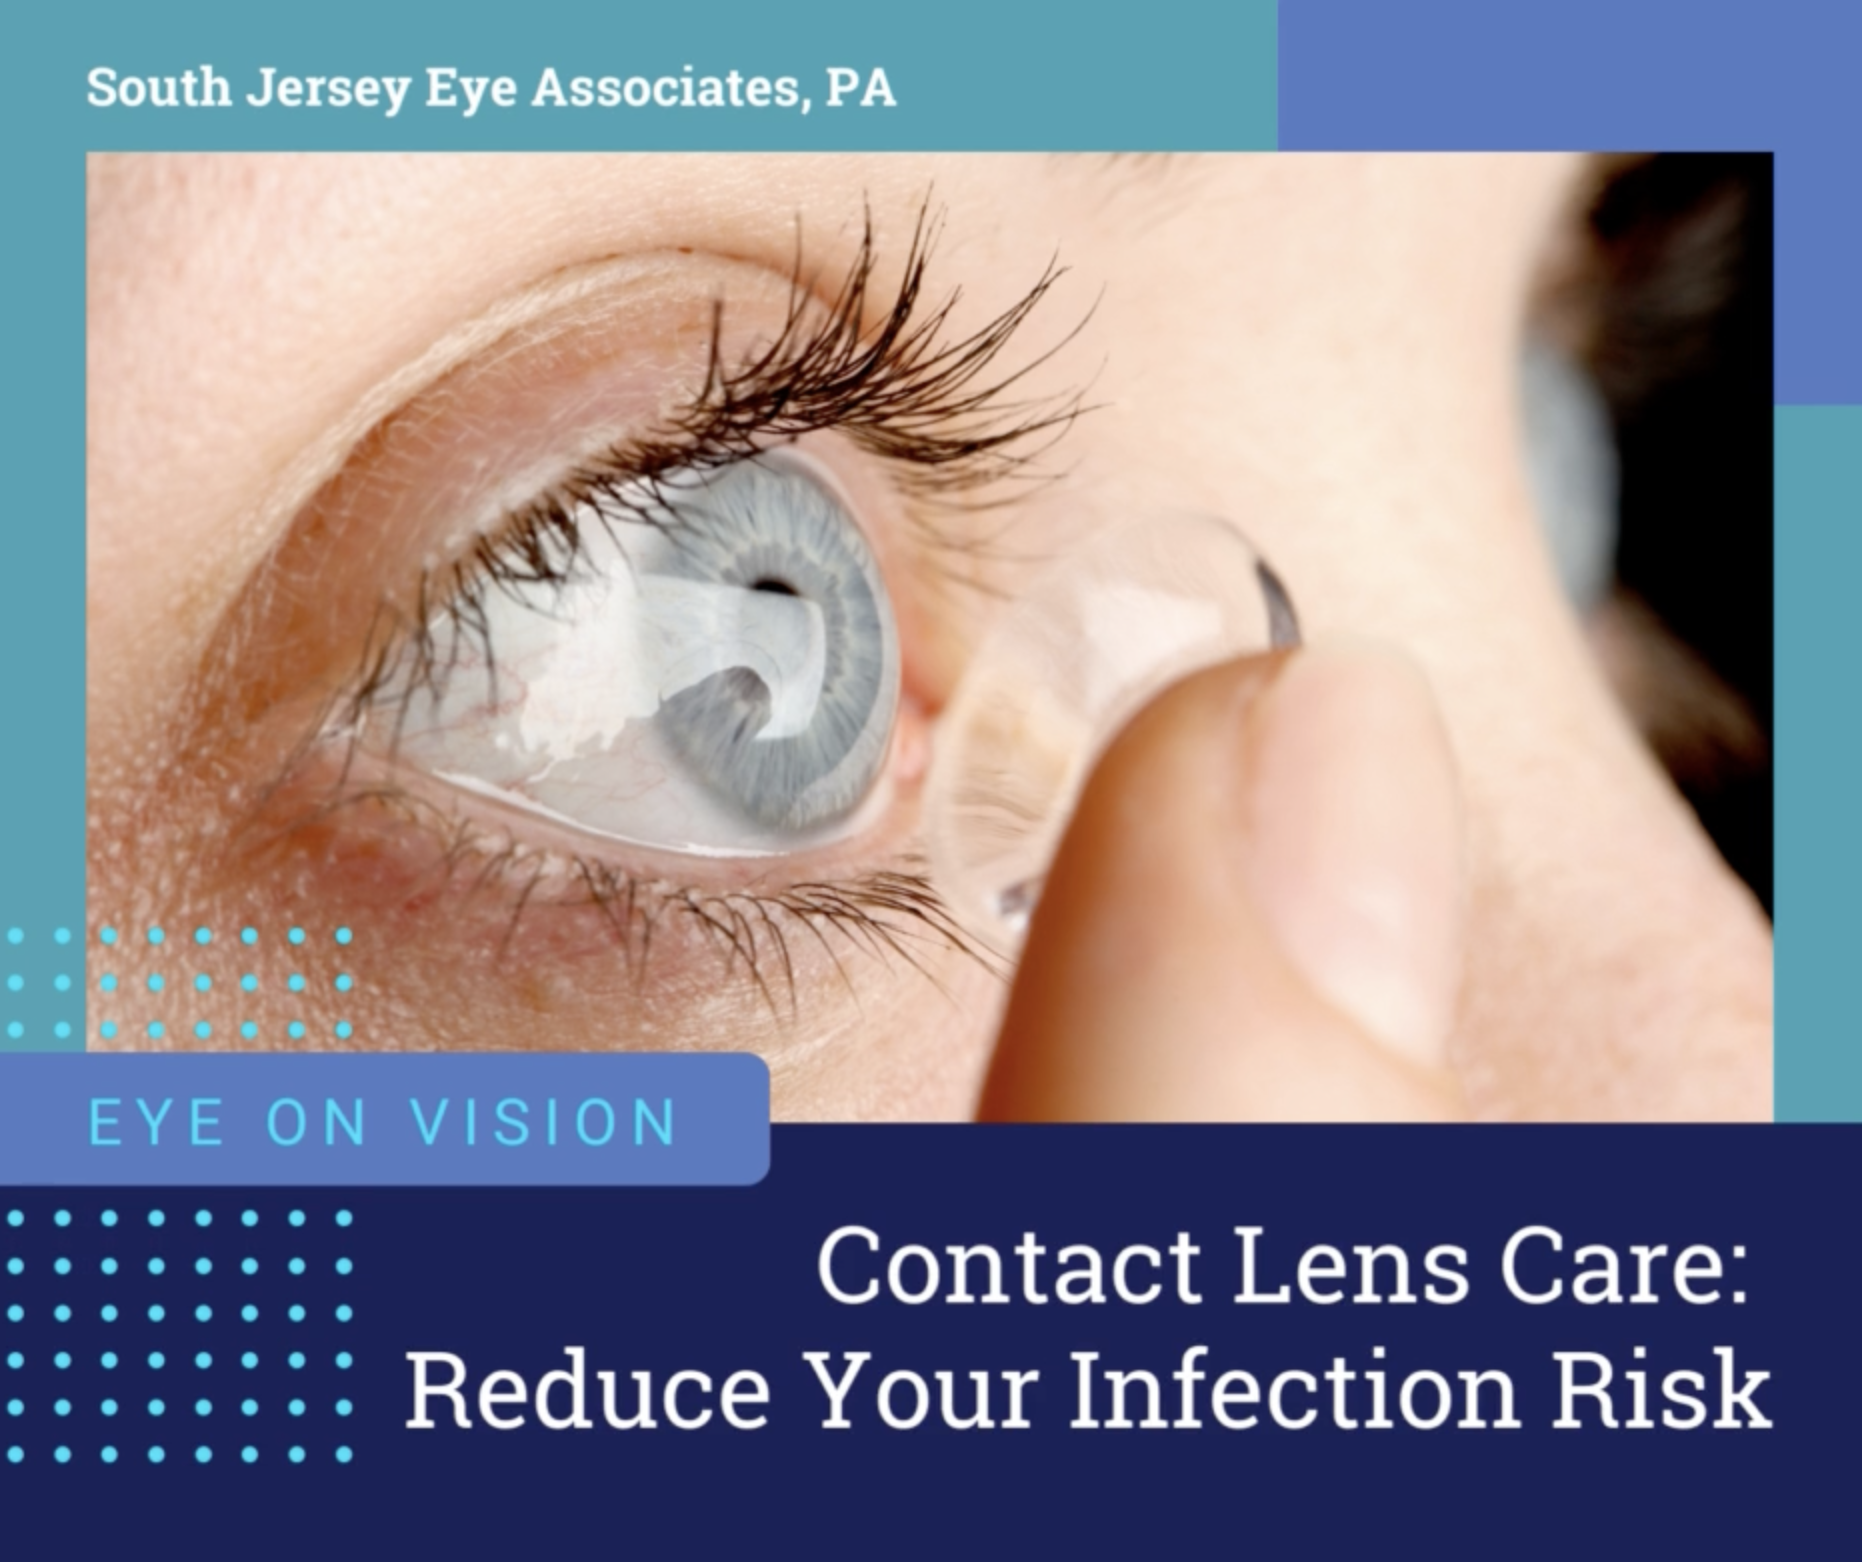 Contact Lens Care: Reduce Your Infection Risk